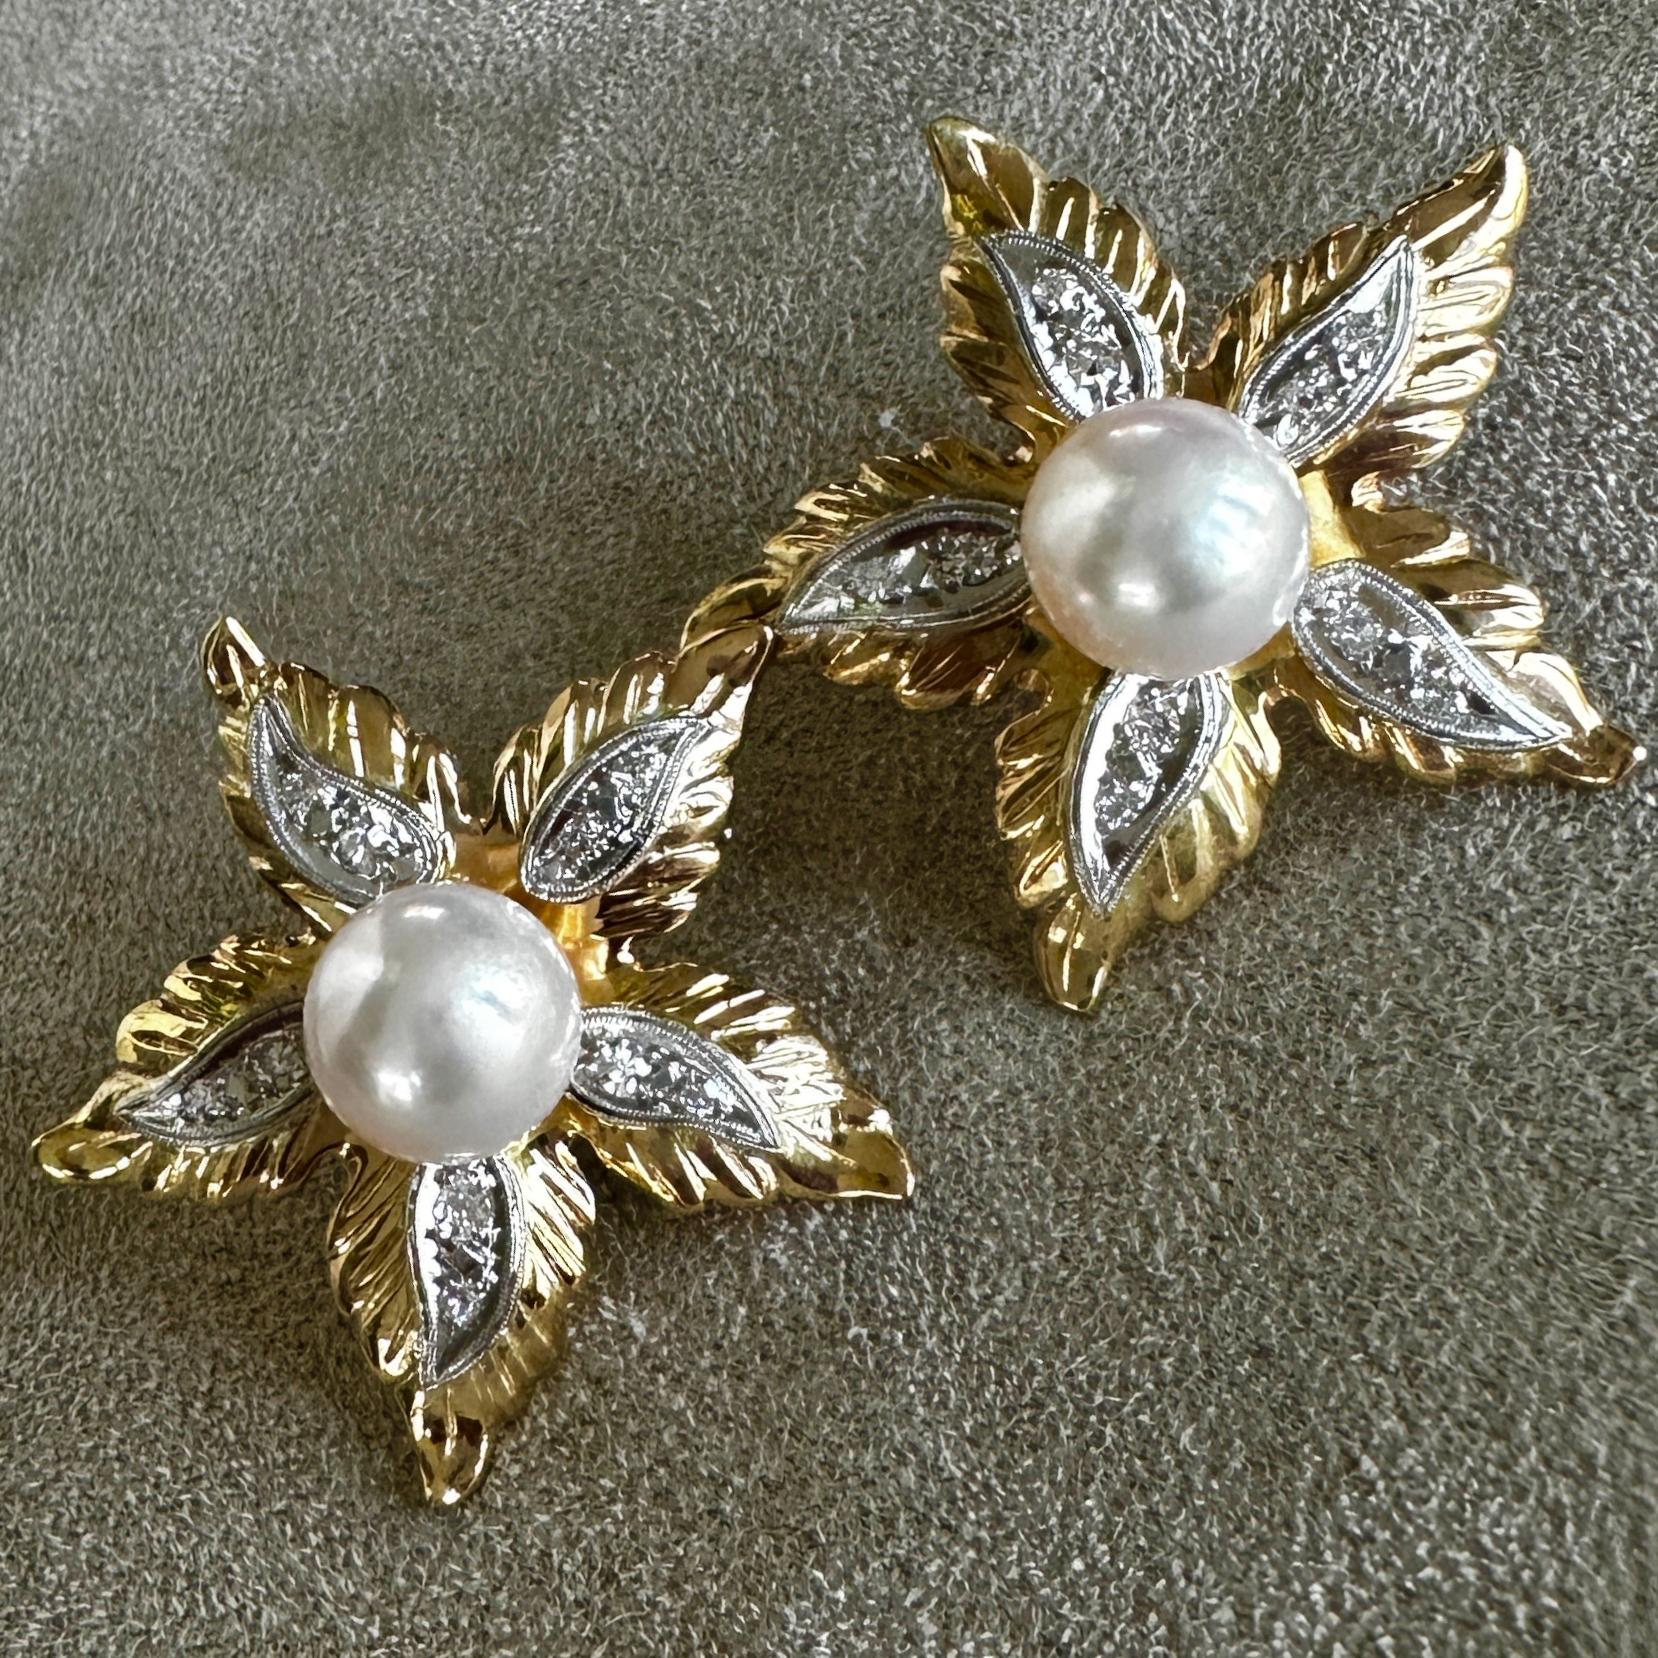 8.5mm Akoya Pearls in Large Flower Earrings of 18K Gold & Platinum with Diamonds For Sale 3